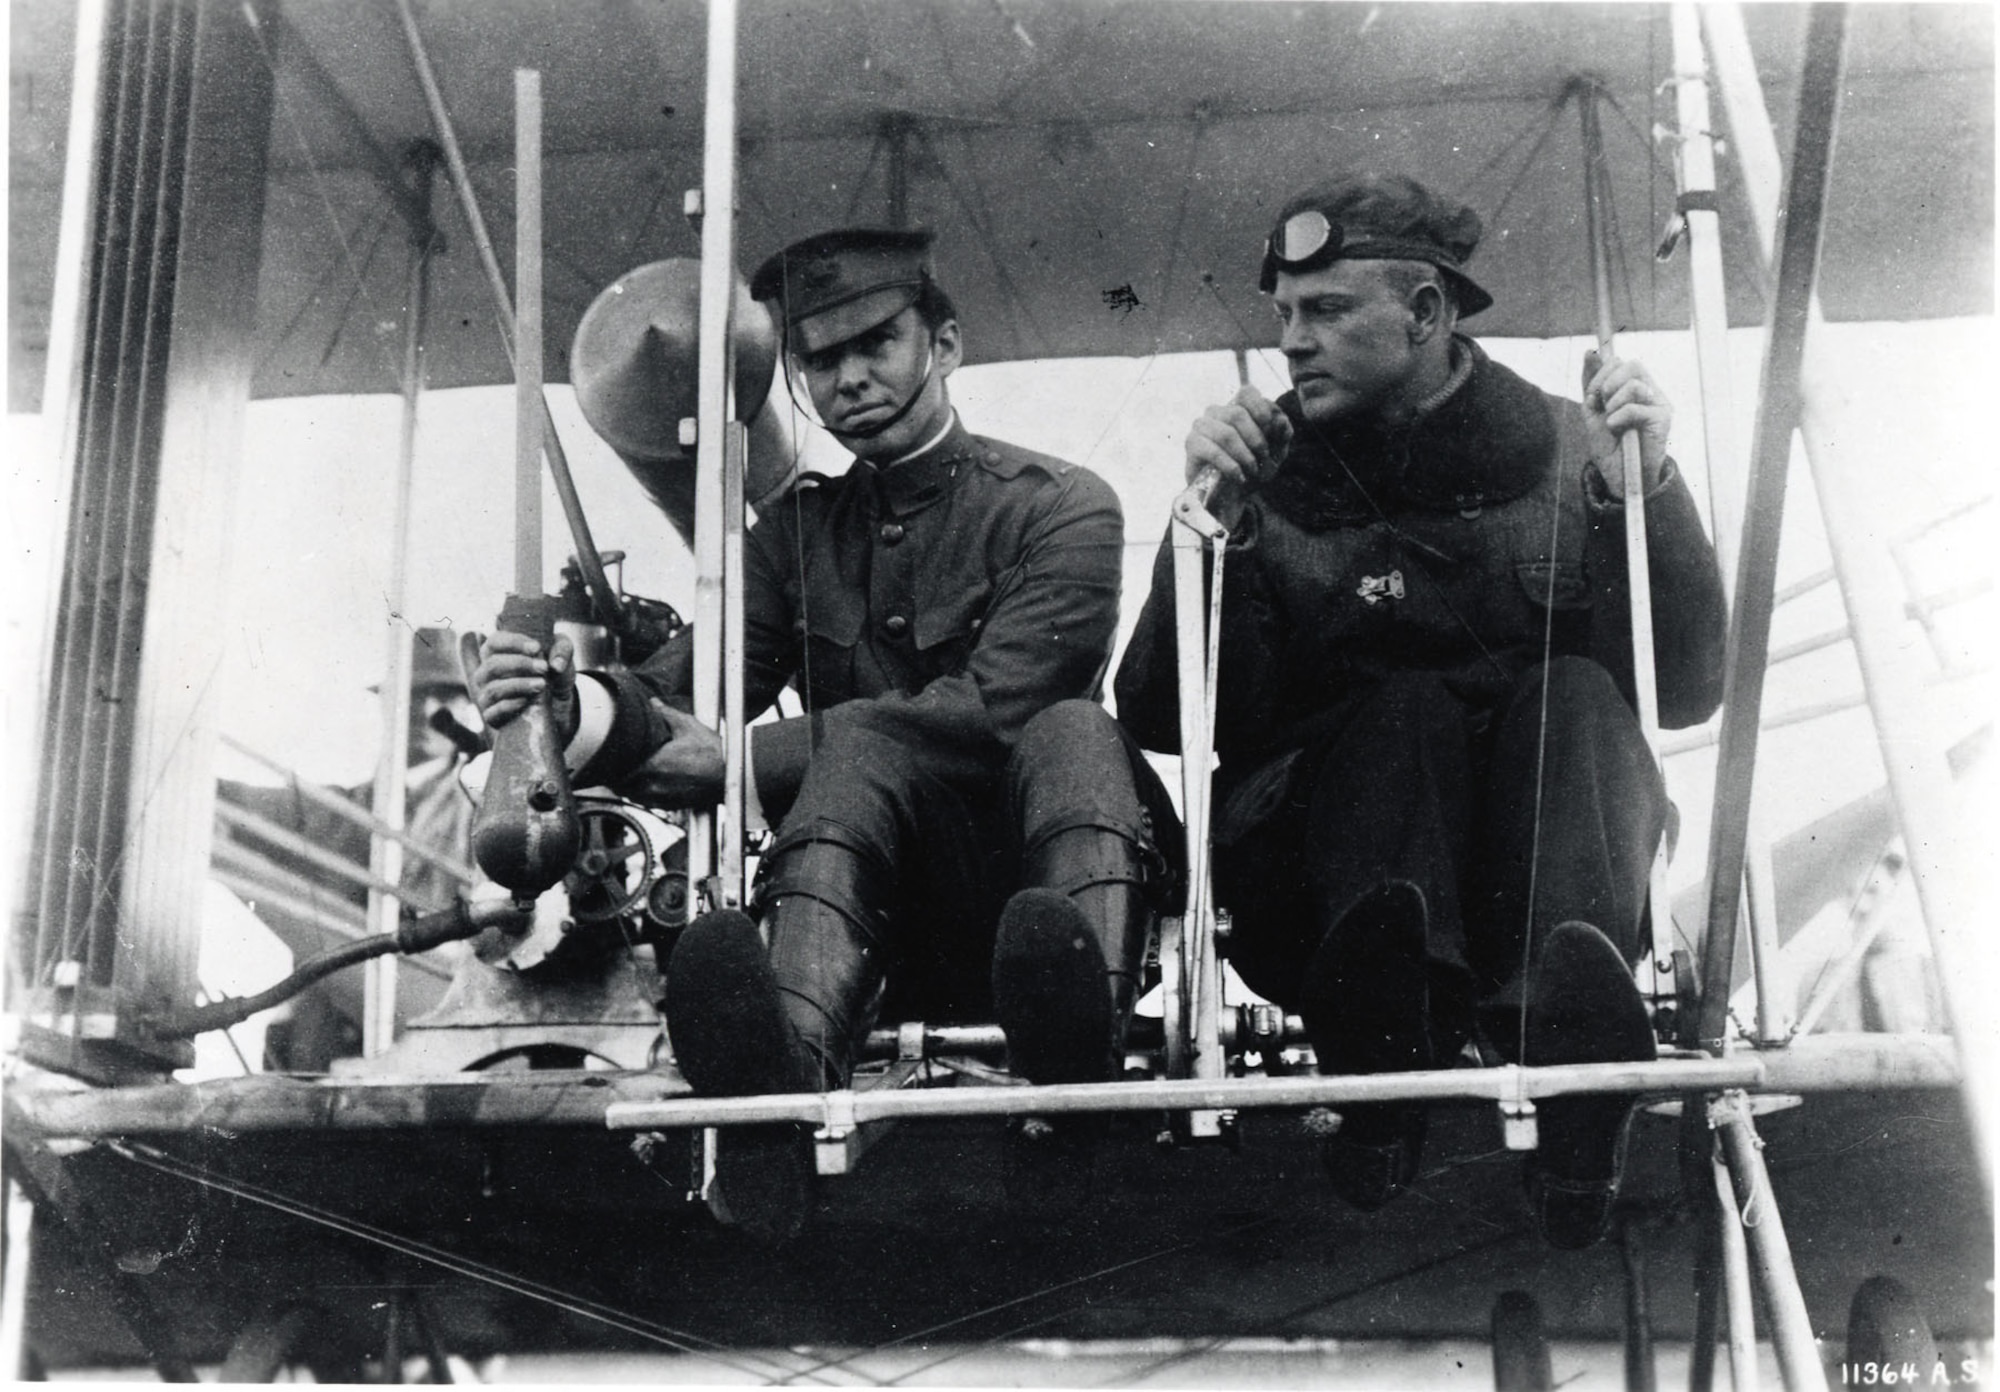 Phil Parmalee and Lt. Myron Crissy (left) with first live bomb in a Wright plane, Los Angeles, Jan. 15, 1911. (U.S. Air Force photo)